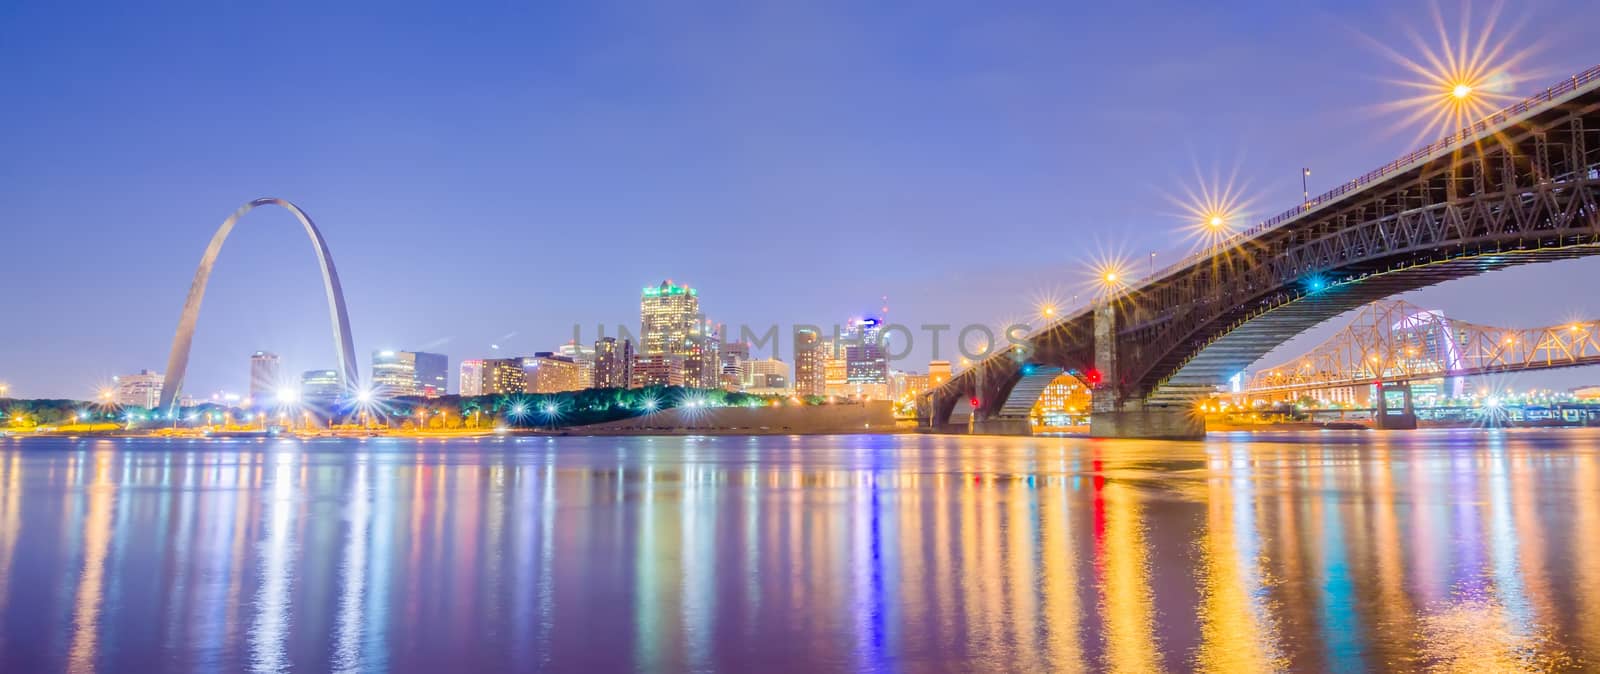 City of St. Louis skyline. Image of St. Louis downtown with Gate by digidreamgrafix